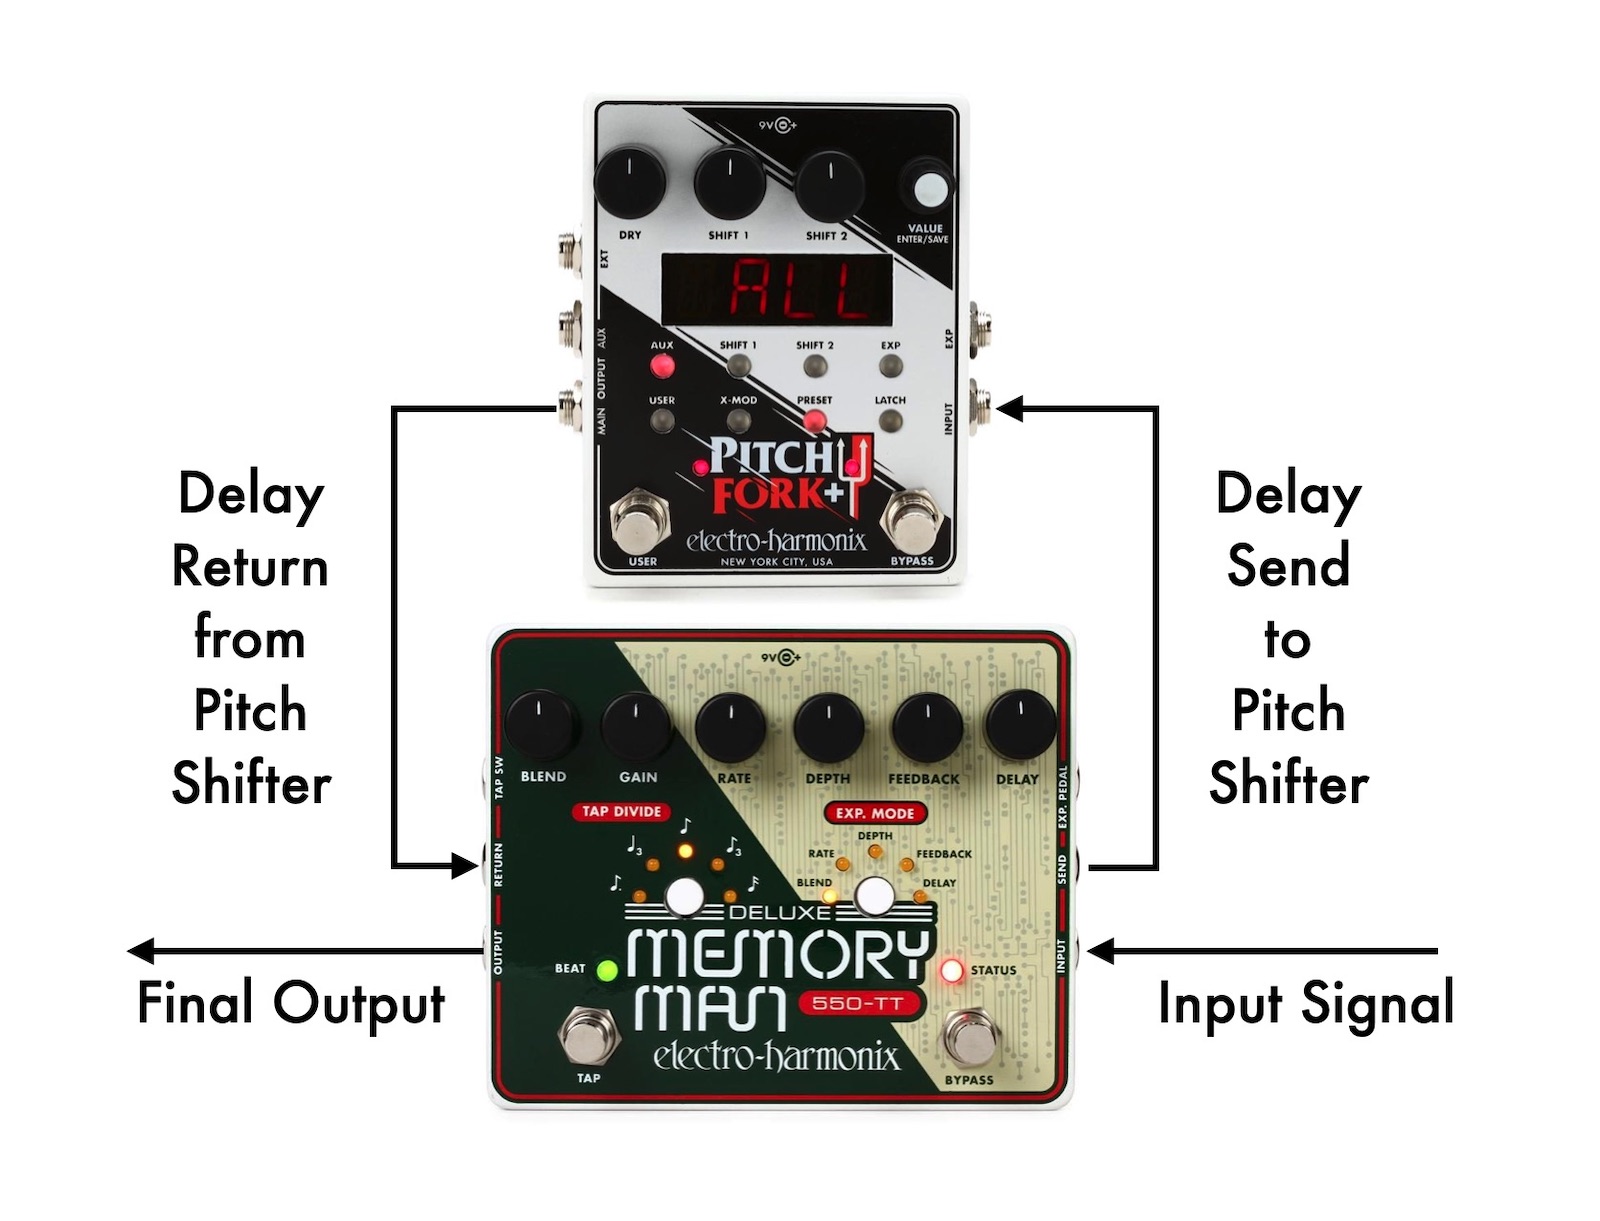 Setup for inserting a pitch shifter into a delay's feedback loop